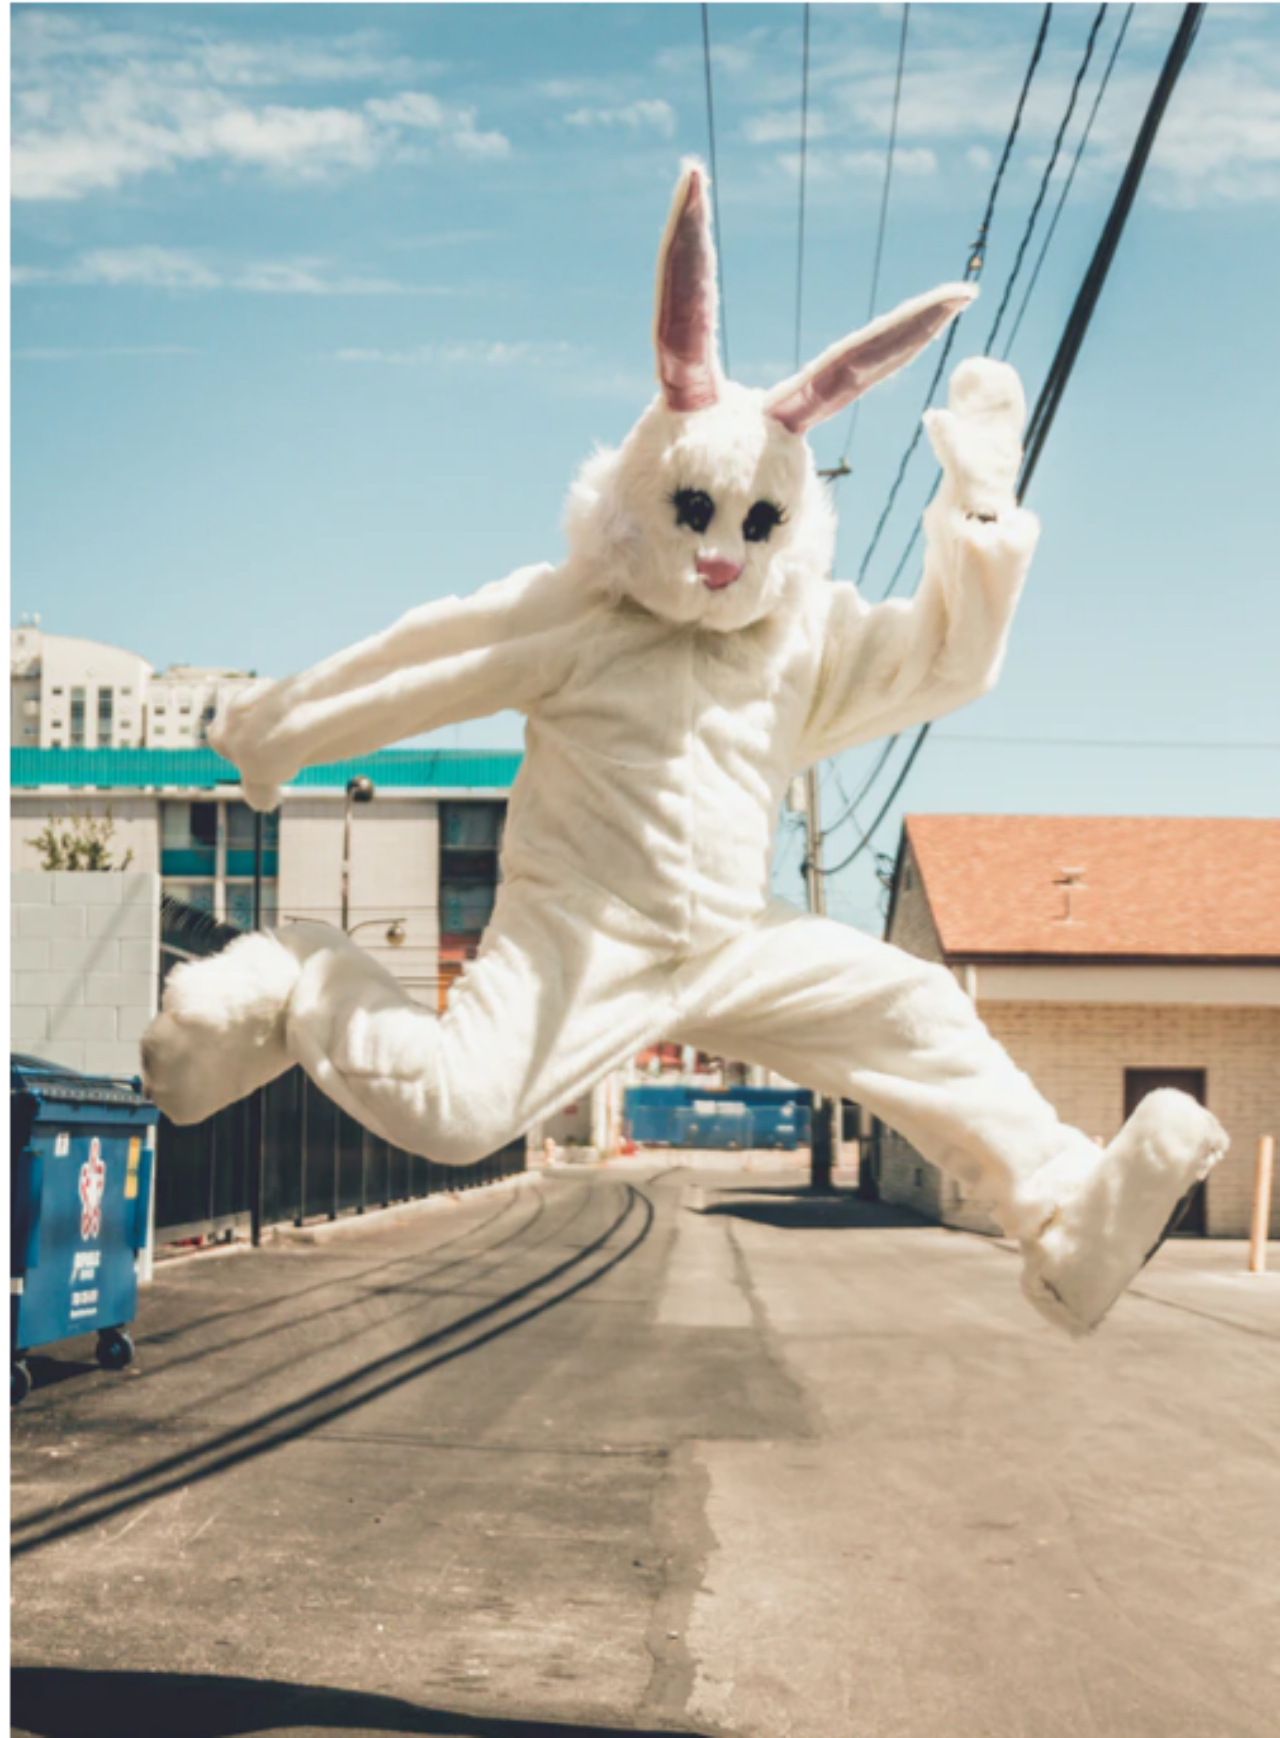 Jumping easter bunny by our Midwest Vacation Destination, Surety Hotel